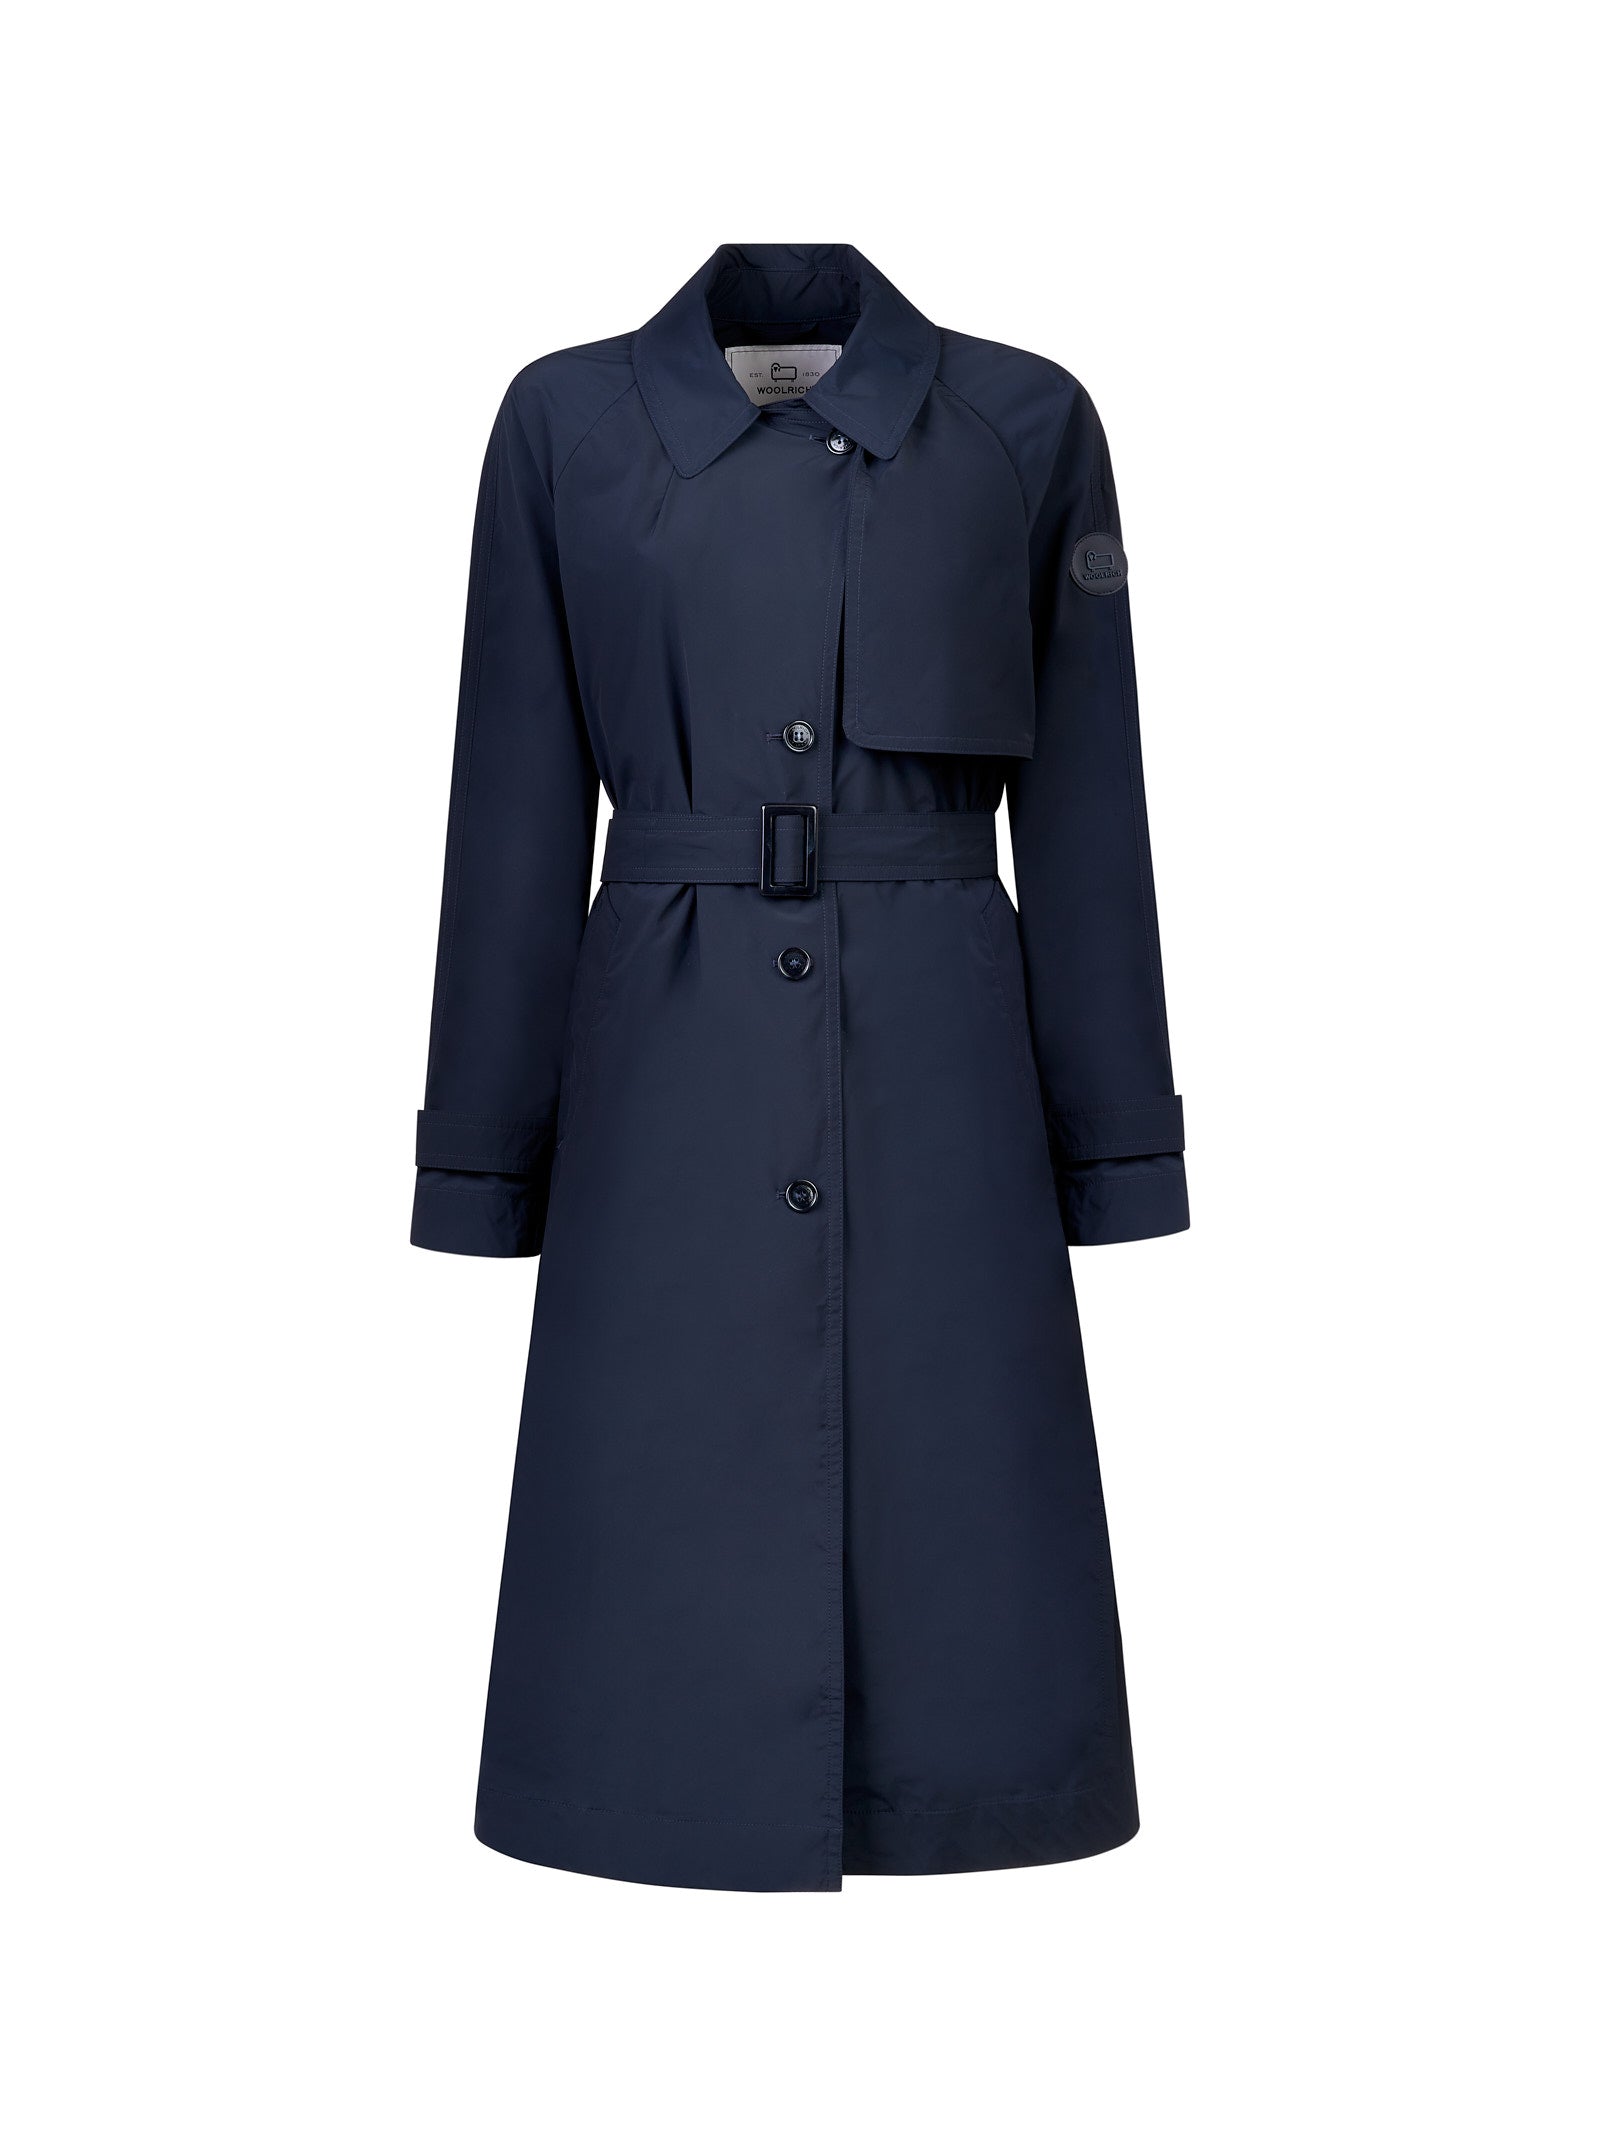 Trench WOOLRICH
Melton blue